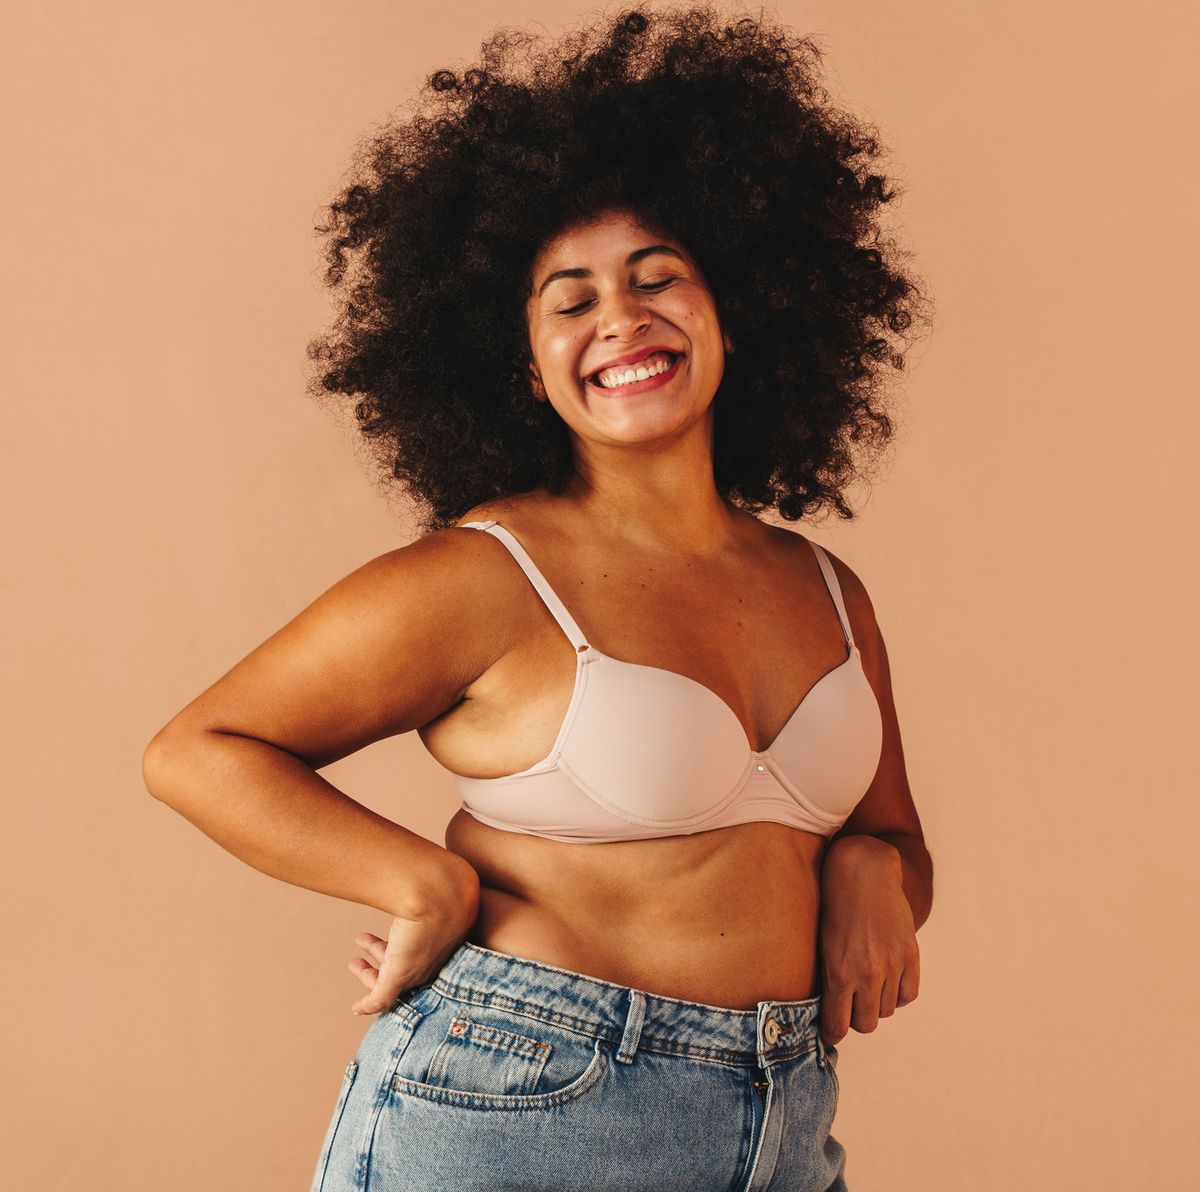 Saggy Breasts Are a Normal Thing To Have - Here's What To Know